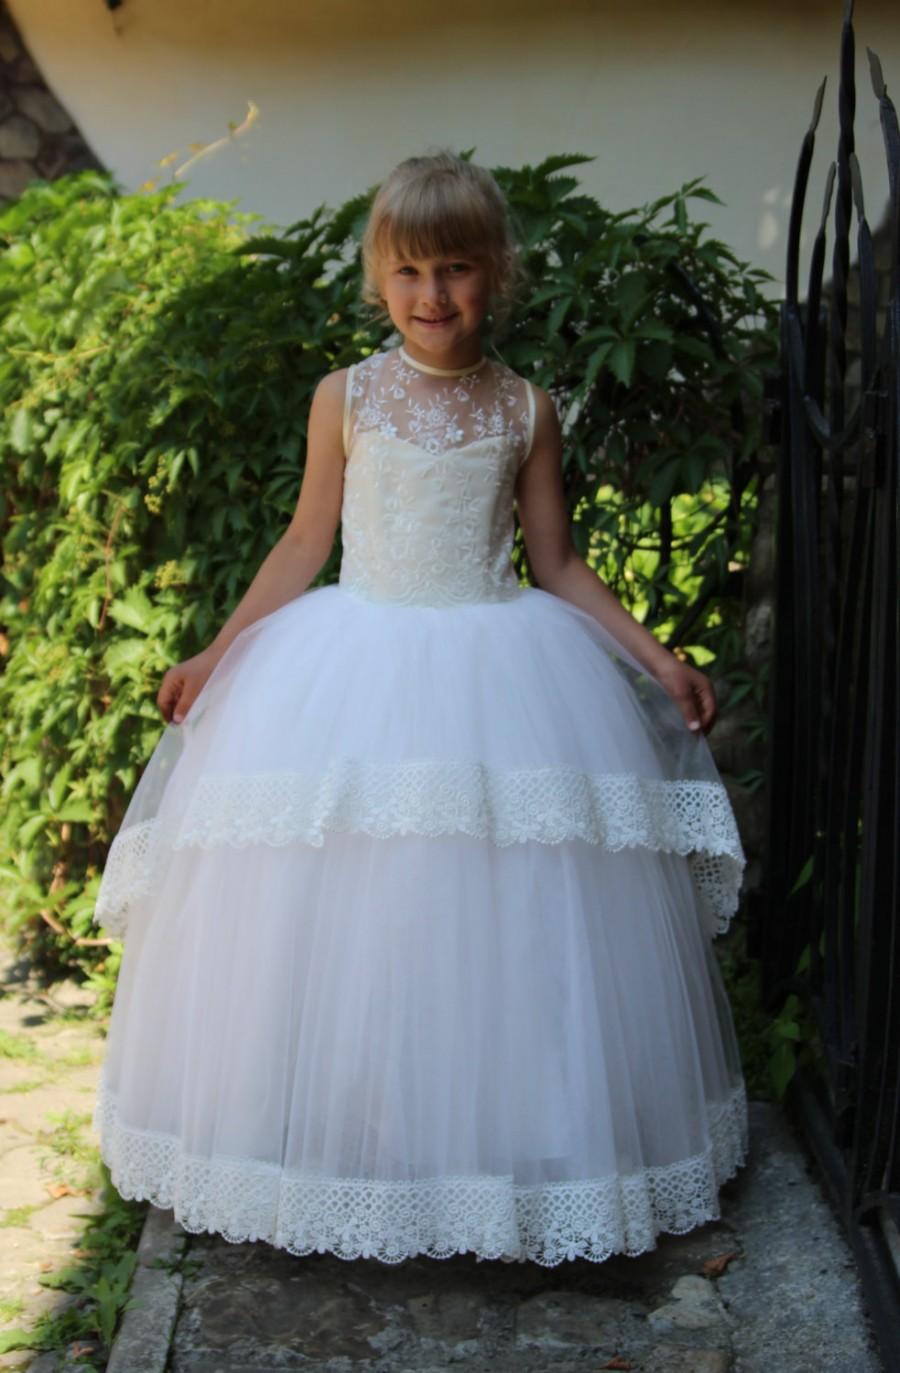 Mariage - Lace Ivory Flower Girl Dress - Wedding Party Birthday Peasant Bridesmaid Ivory Lace Dress